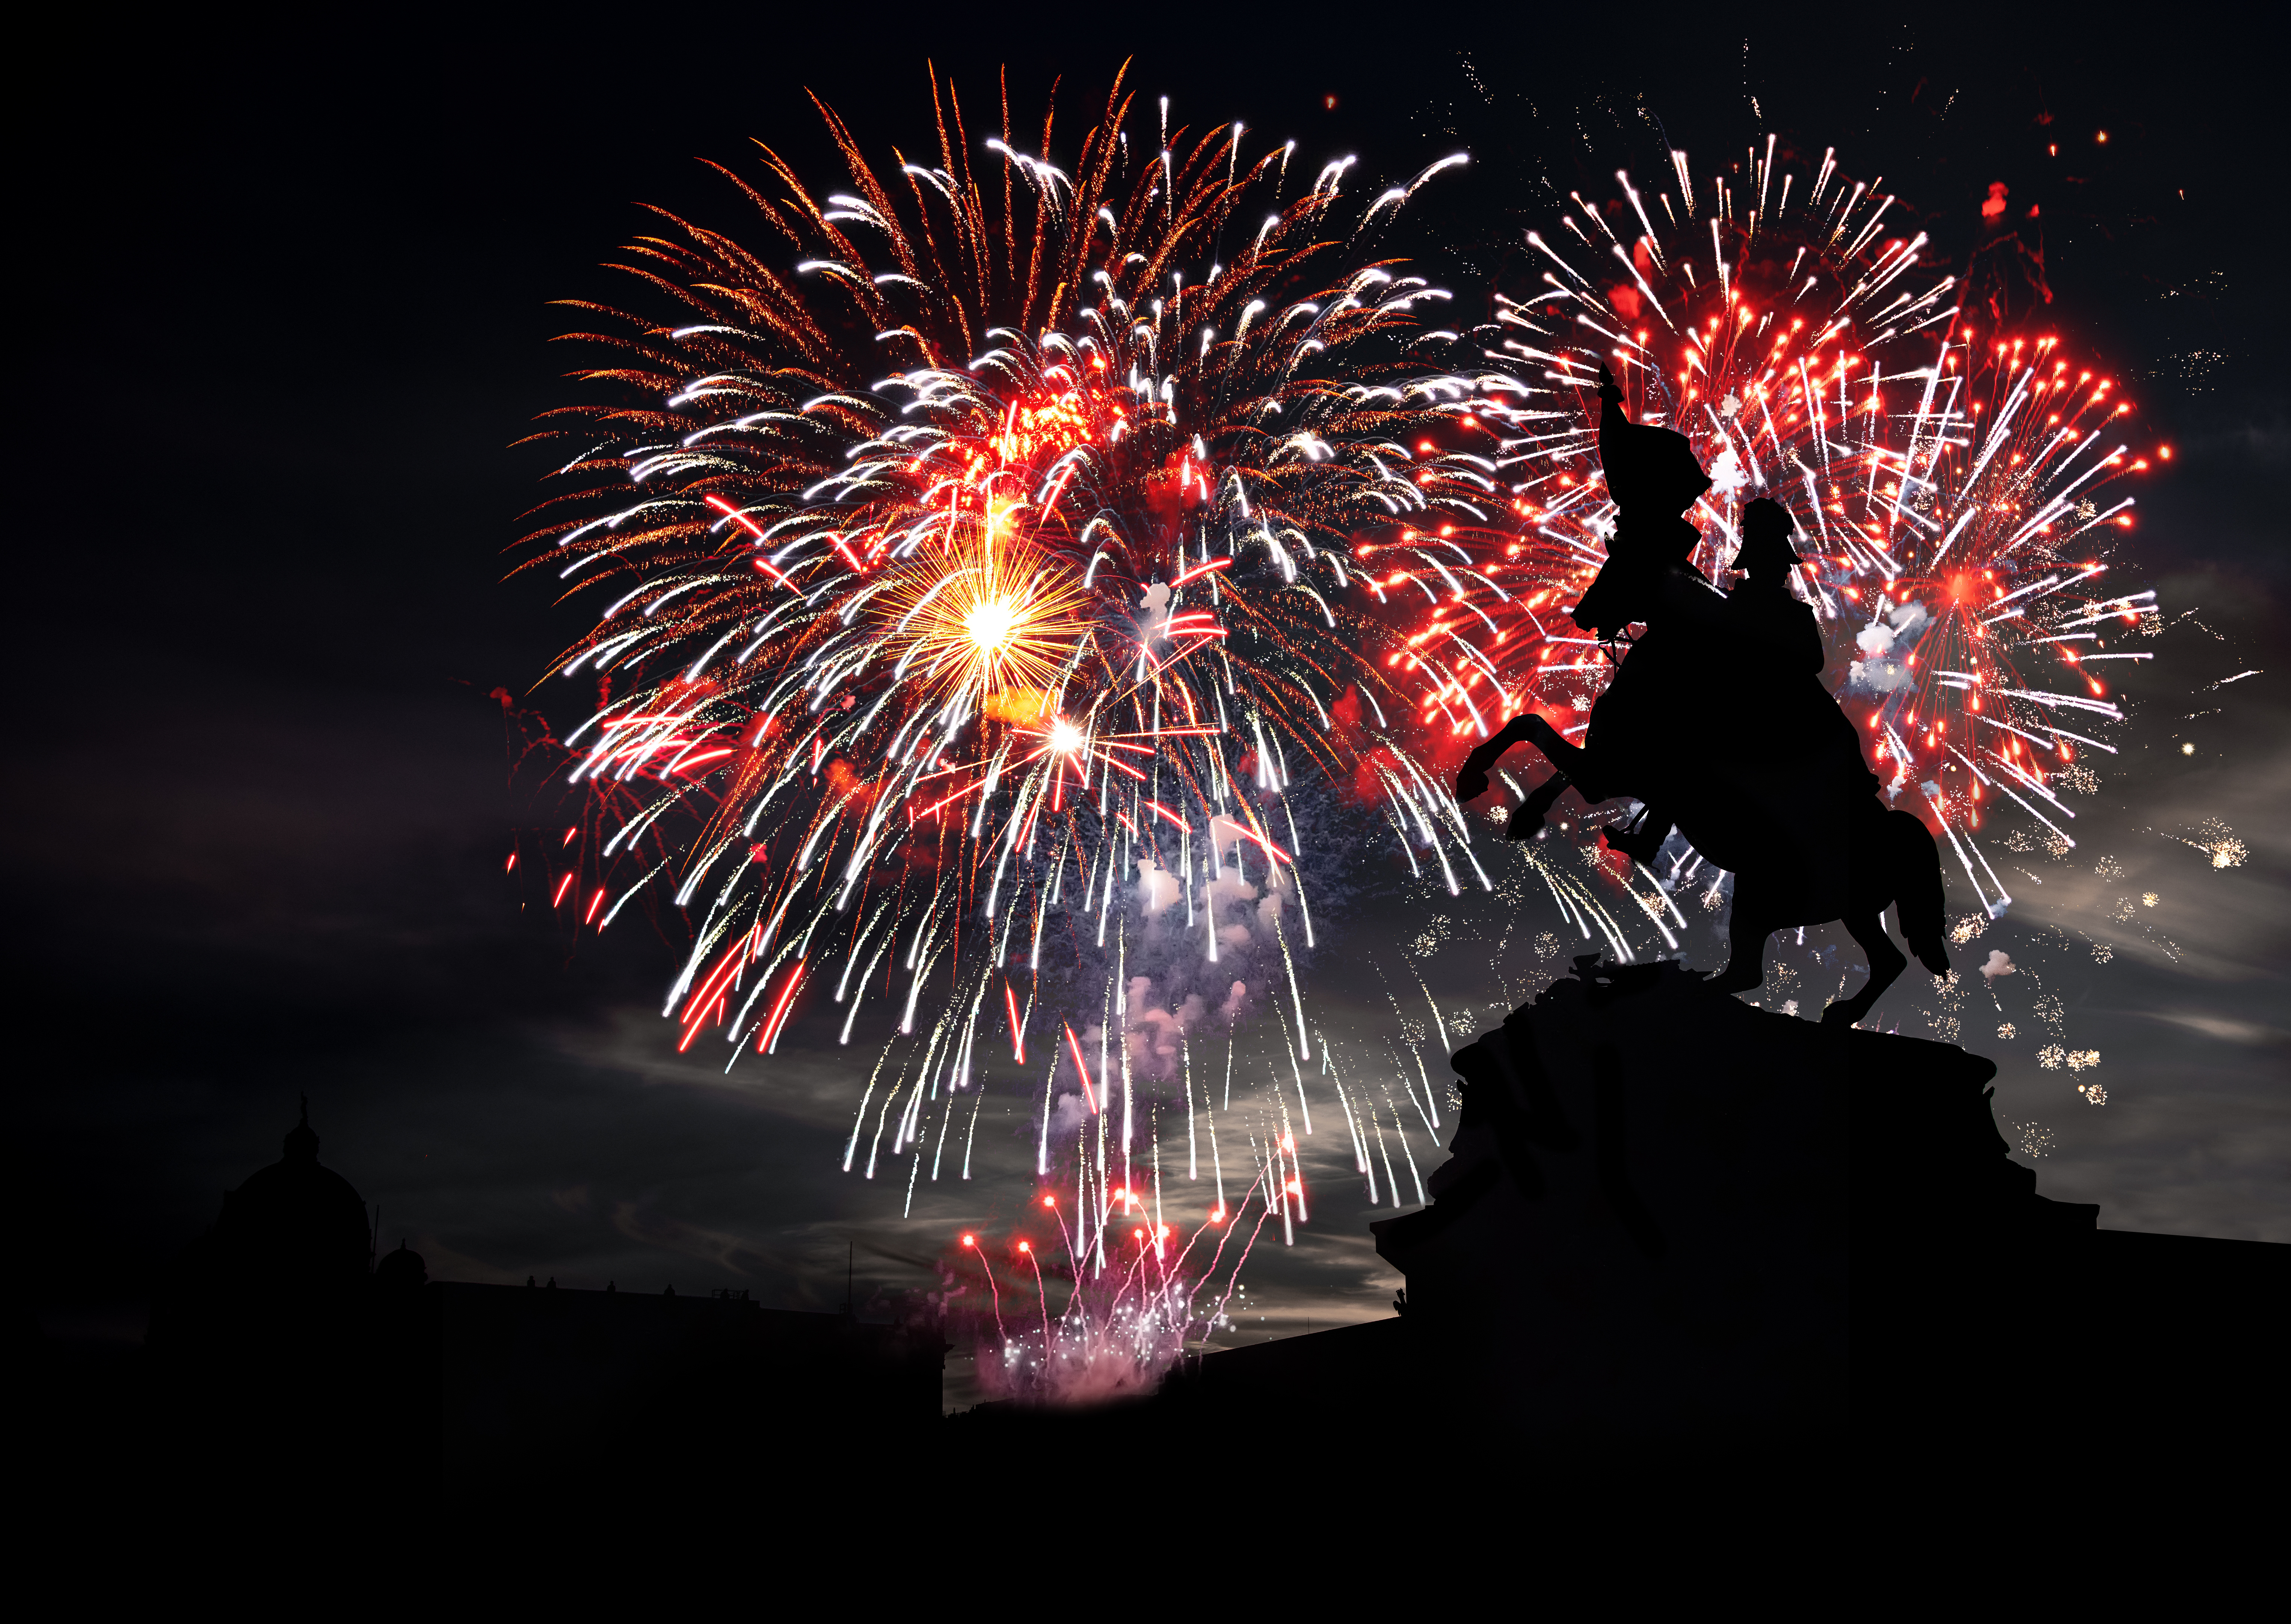 Fireworks in the backgroud of an equestrian statue